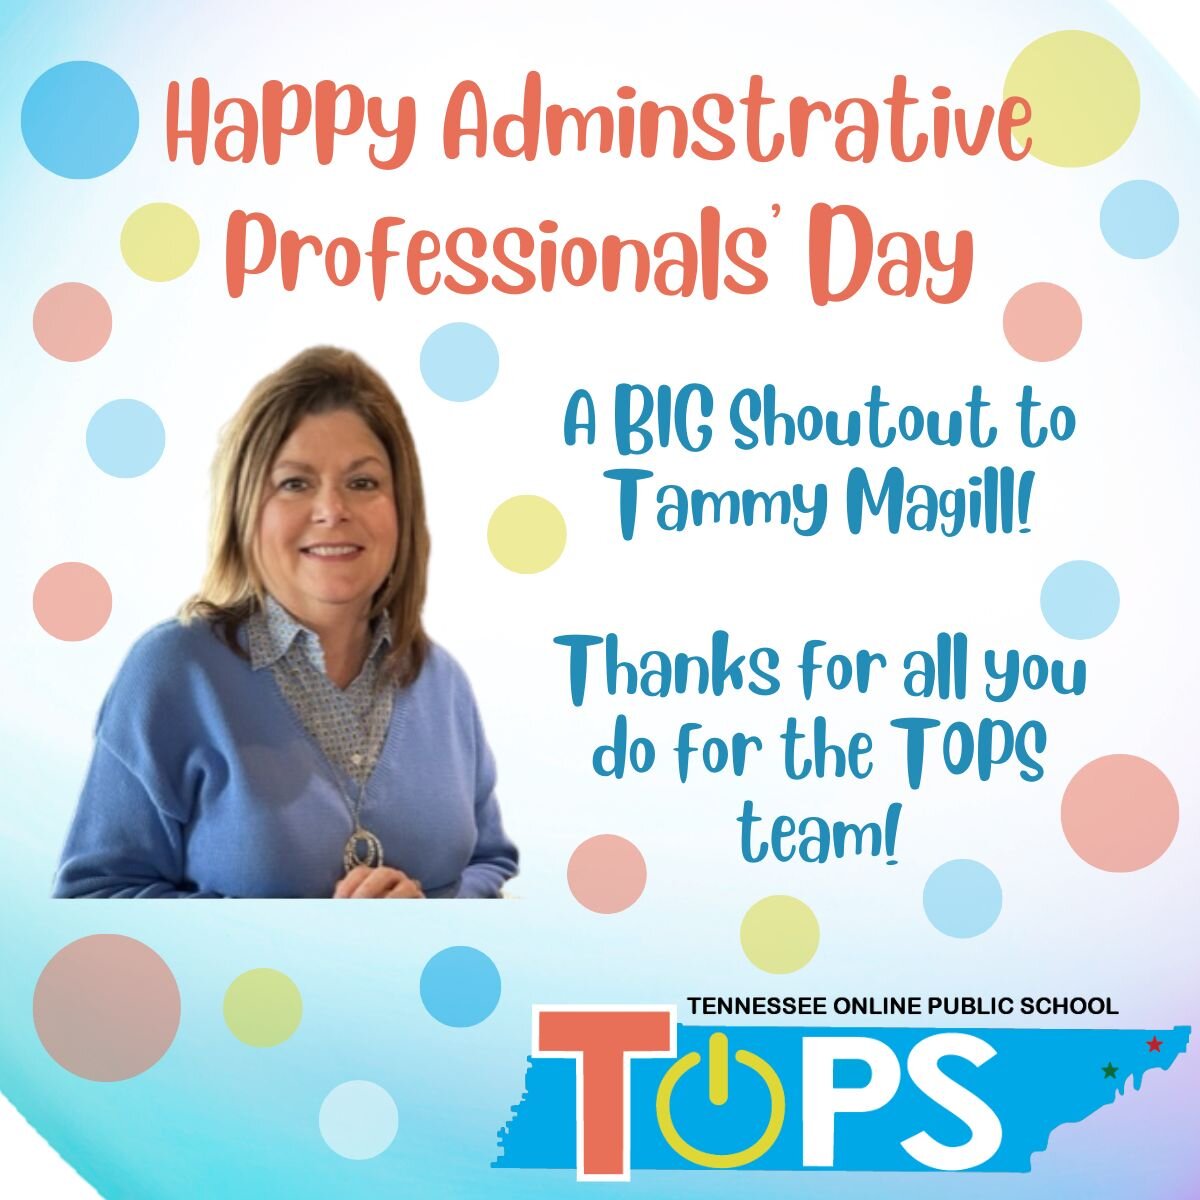 Happy Administrative Professionals Day to our amazing Administrative Assistant, Tammy Magill! Tammy plays an invaluable role at TOPS, providing critical support to our families and staff. Her hard work, dedication, and attention to detail ensure that